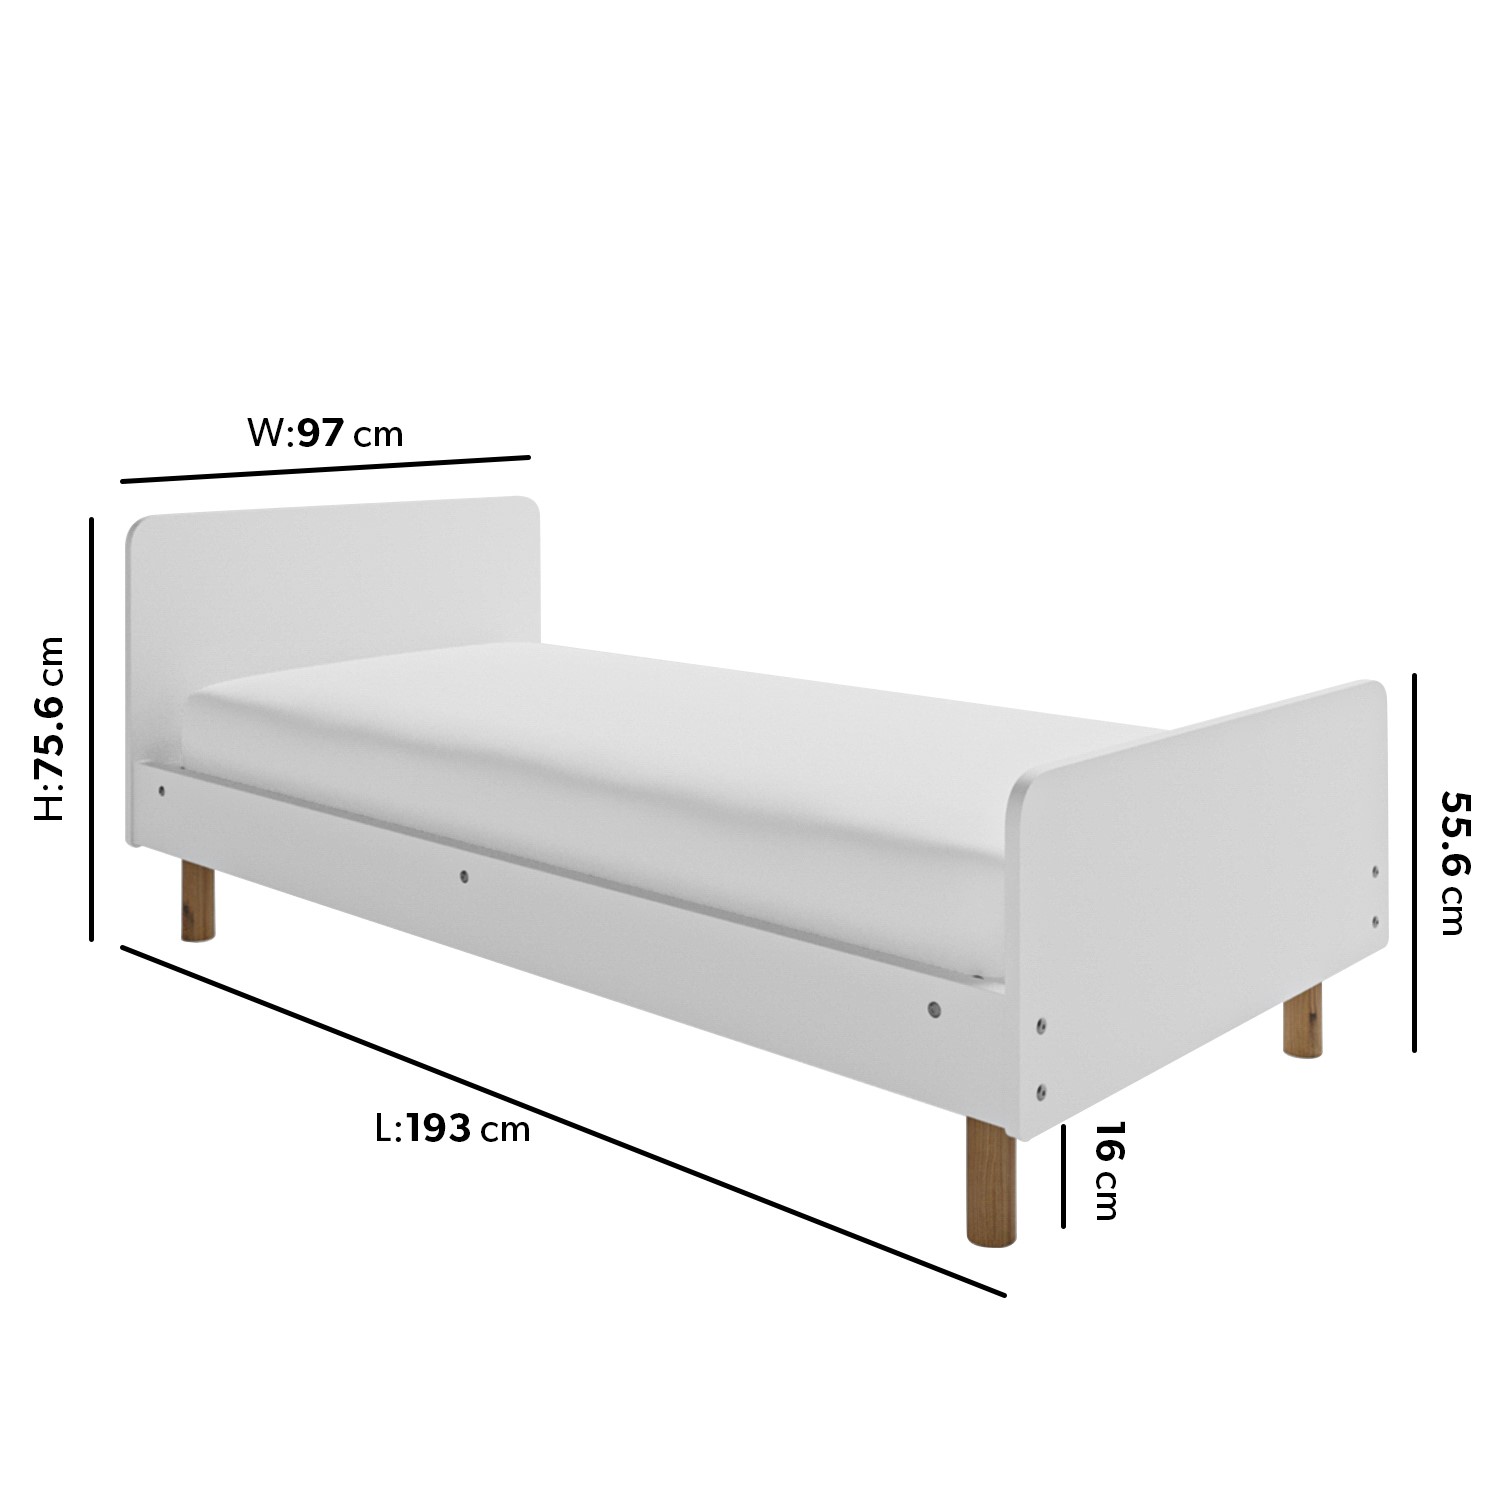 Read more about White wooden single scandi bed frame juni